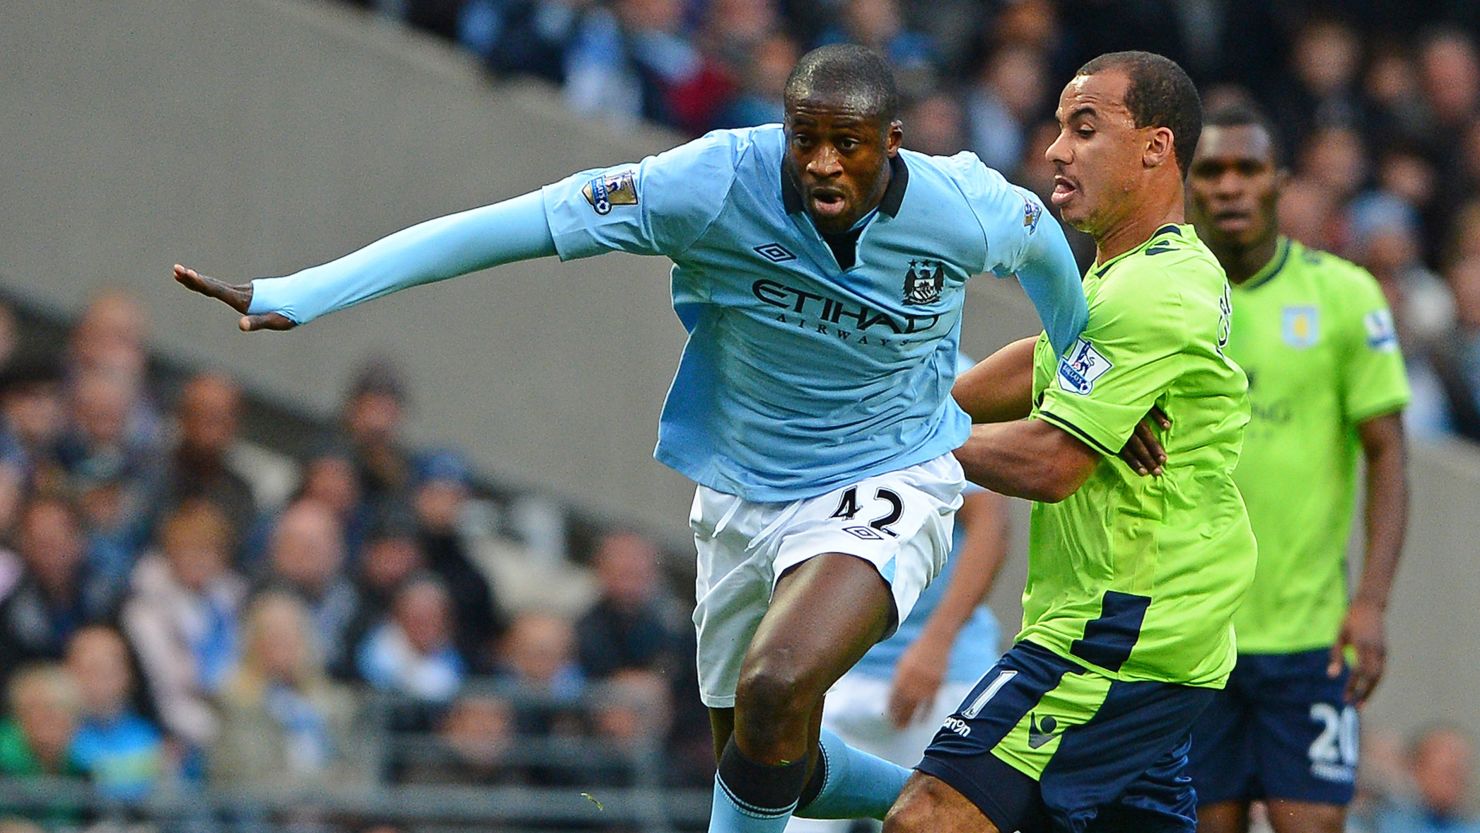 Manchester City and Ivory Coast midfielder Yaya Toure was named African Player of the Year once again.